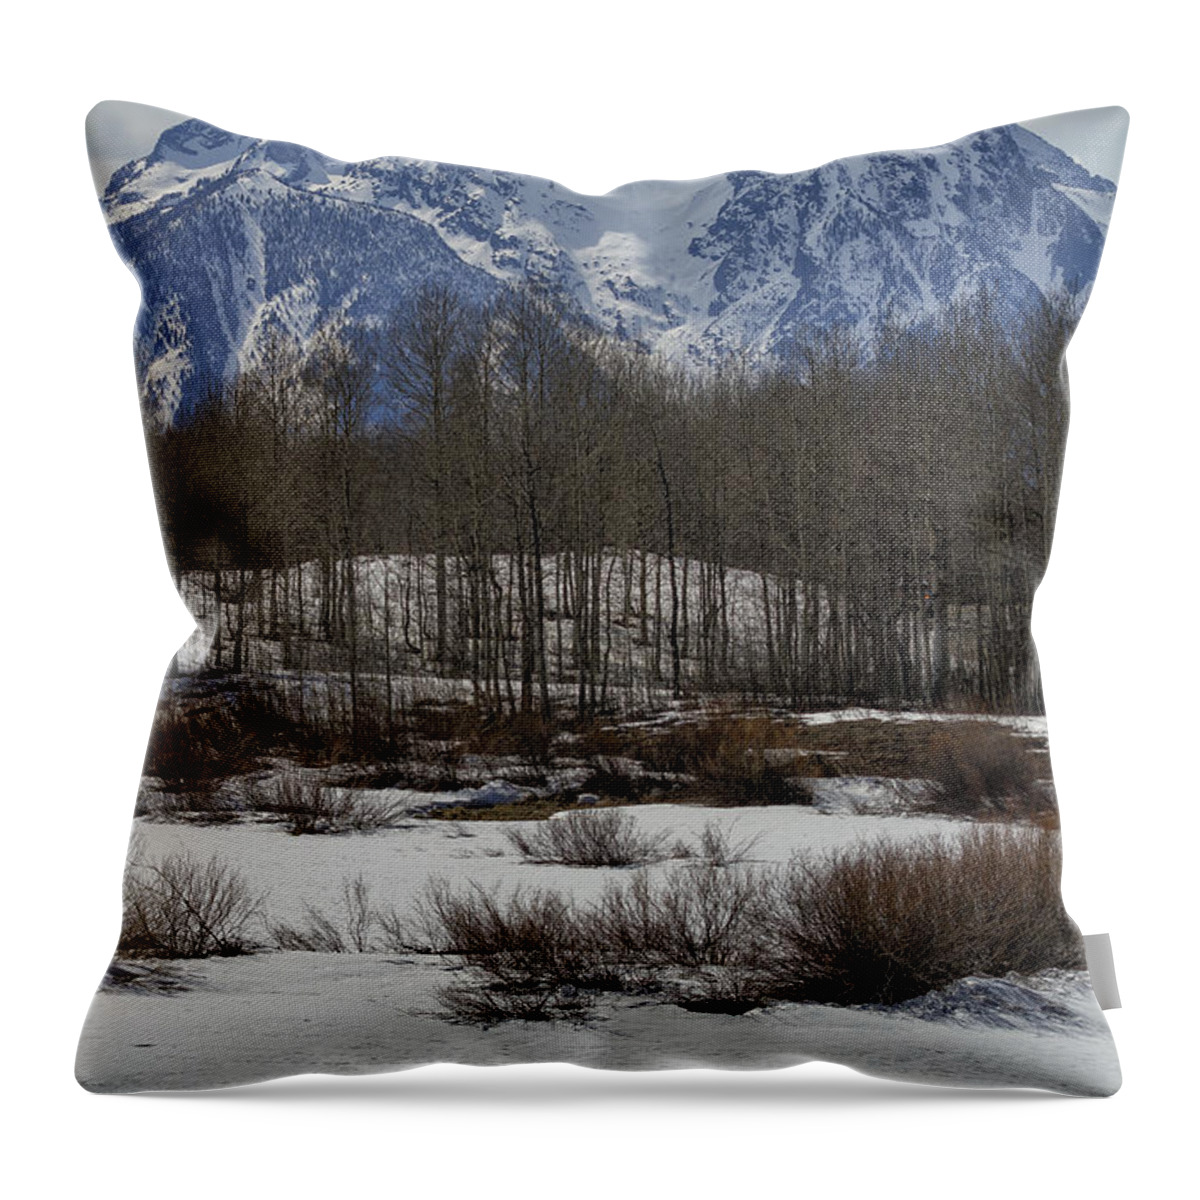 Mt Moran Throw Pillow featuring the photograph Mt Moran from Cattleman's Bridge Site by Belinda Greb